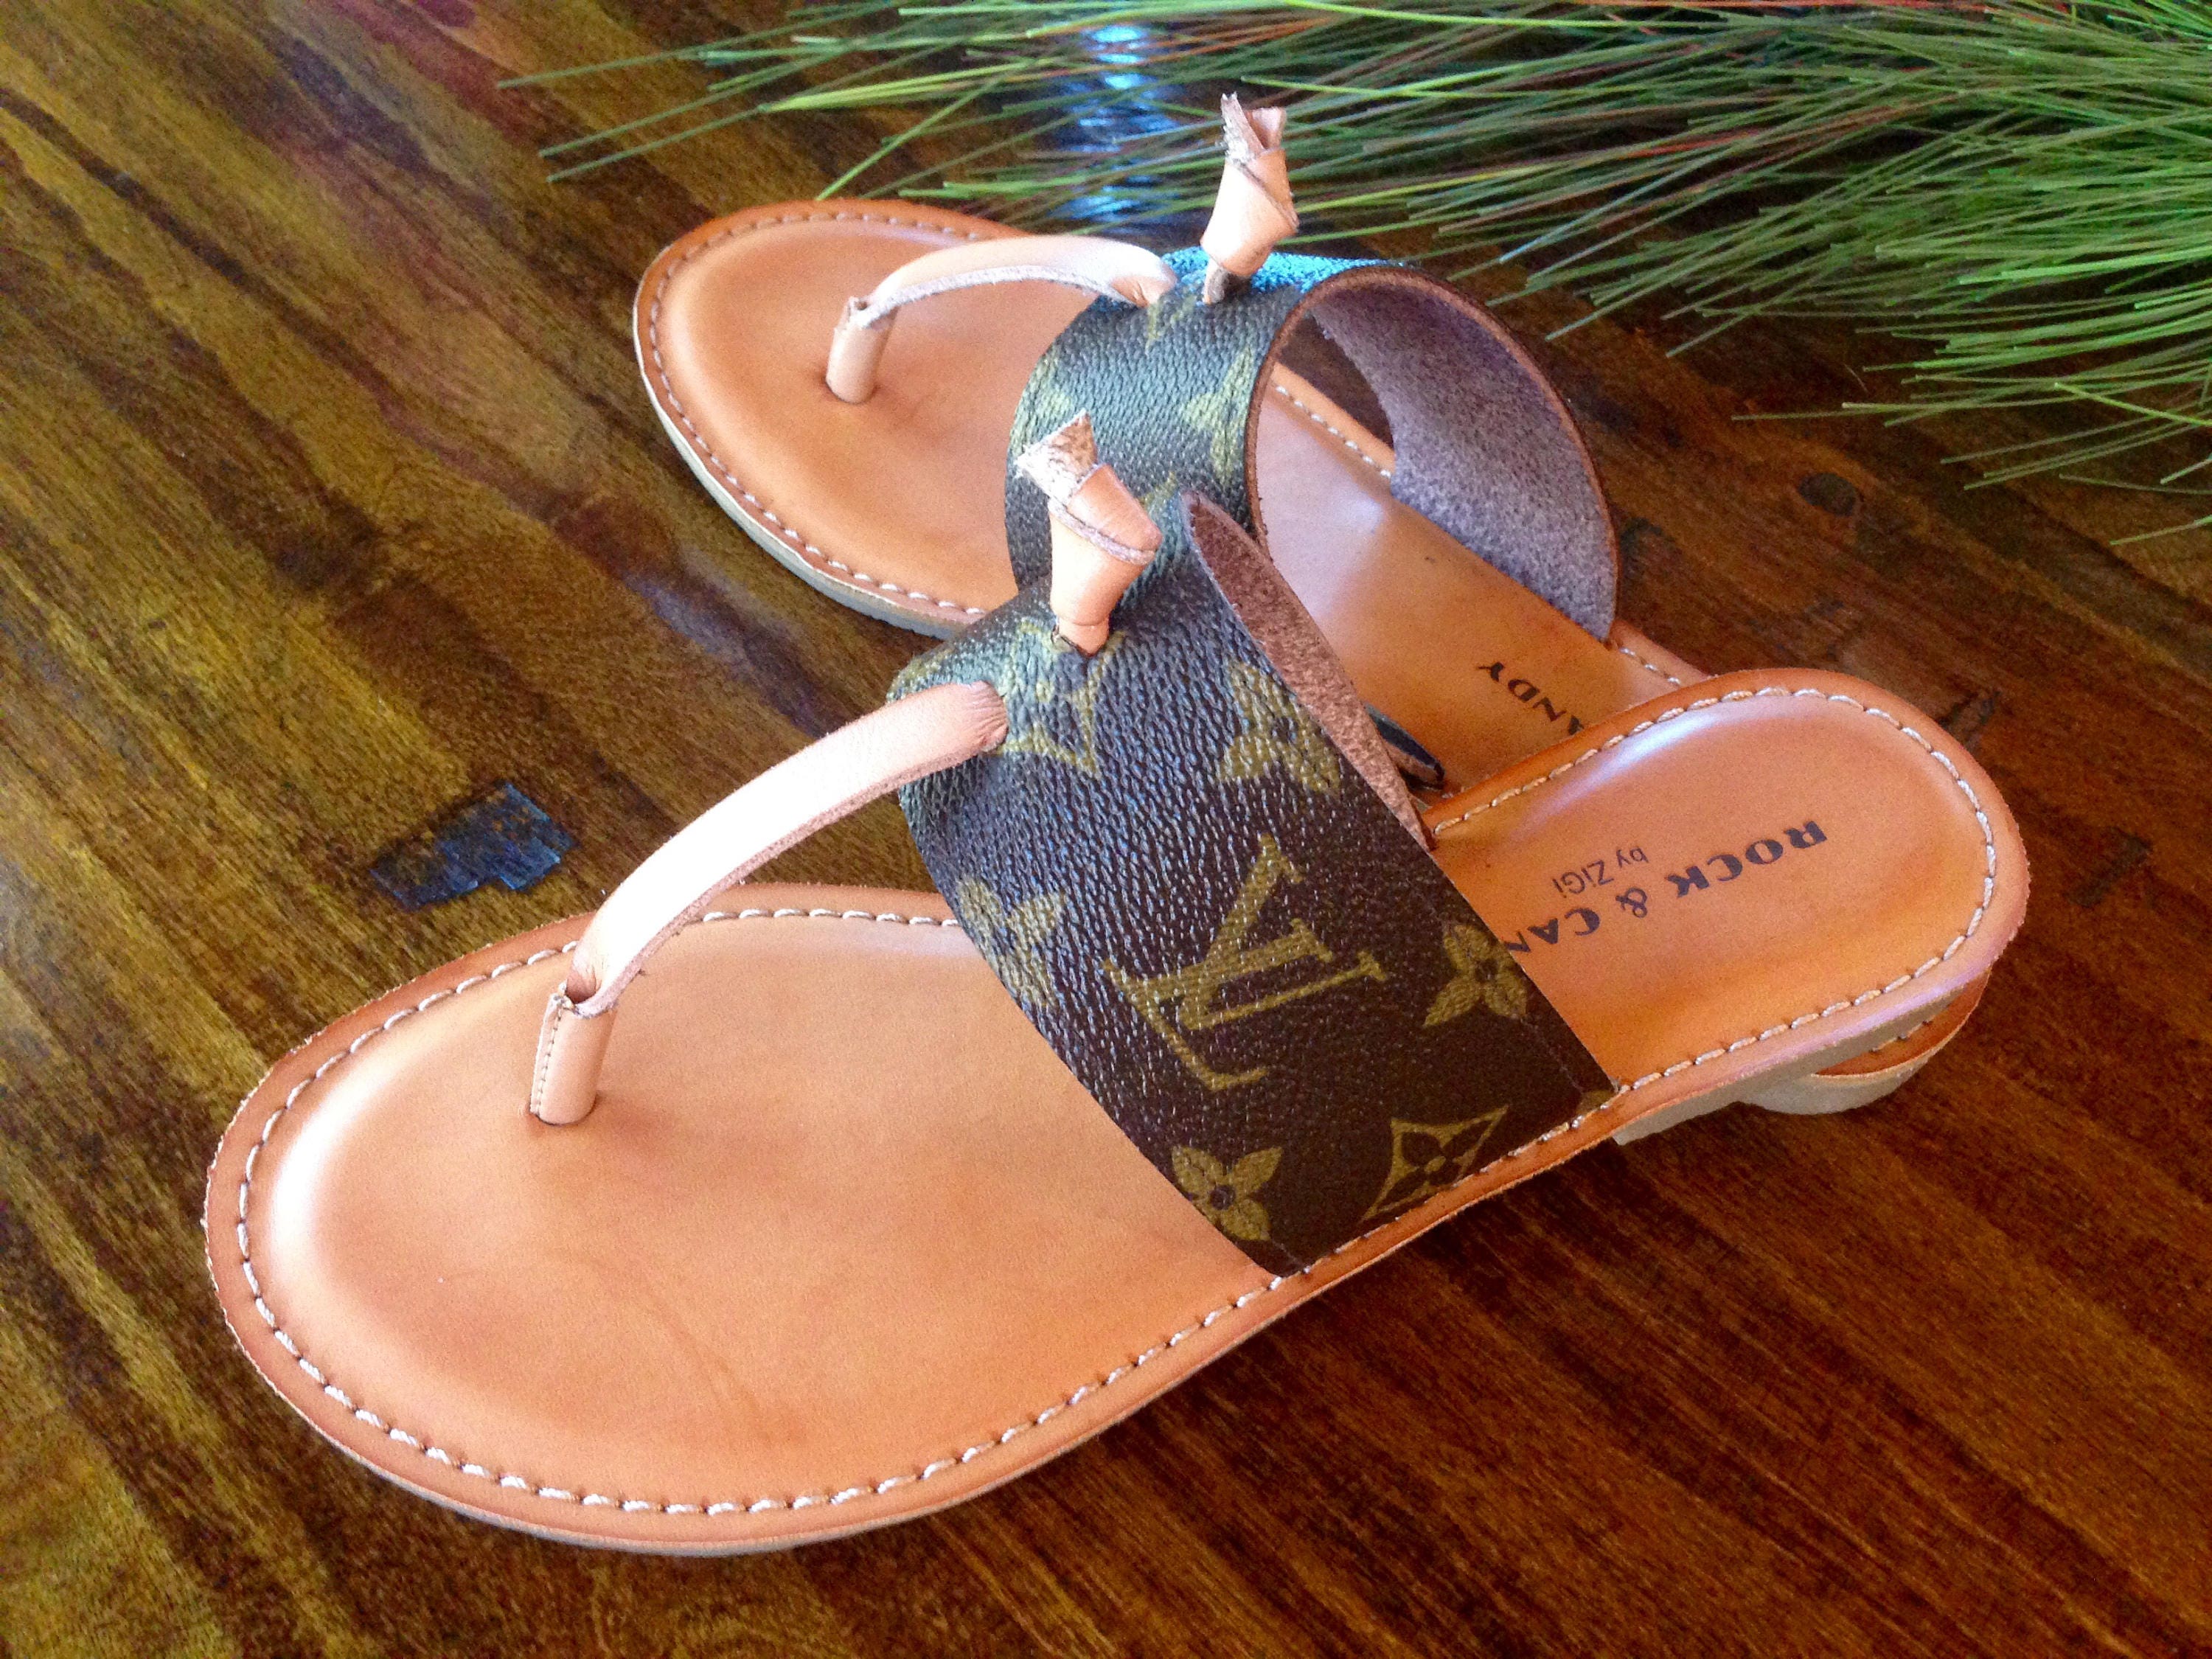 Handcrafted thong sandal fashioned with Repurposed Louis